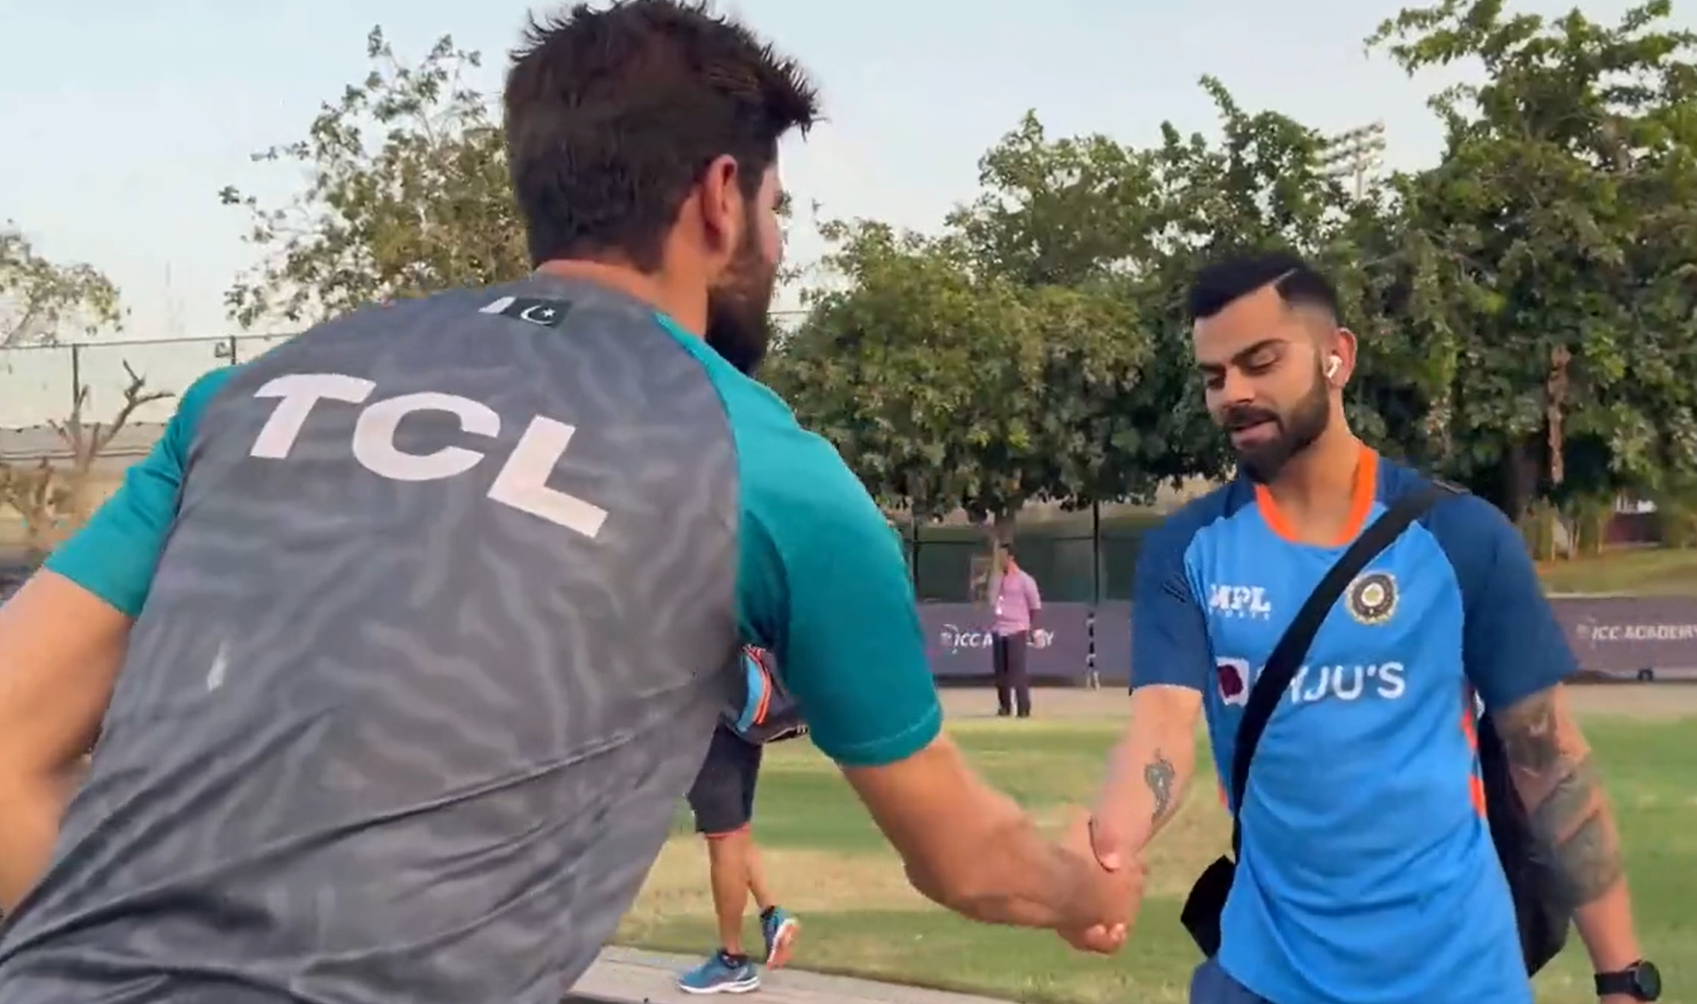 Asia Cup 2022 LIVE: From Rivals to Friends, Shaheen Afridi wishes good luck to Virat Kohli, says "I'll pray for you to return to form" - Watch Video